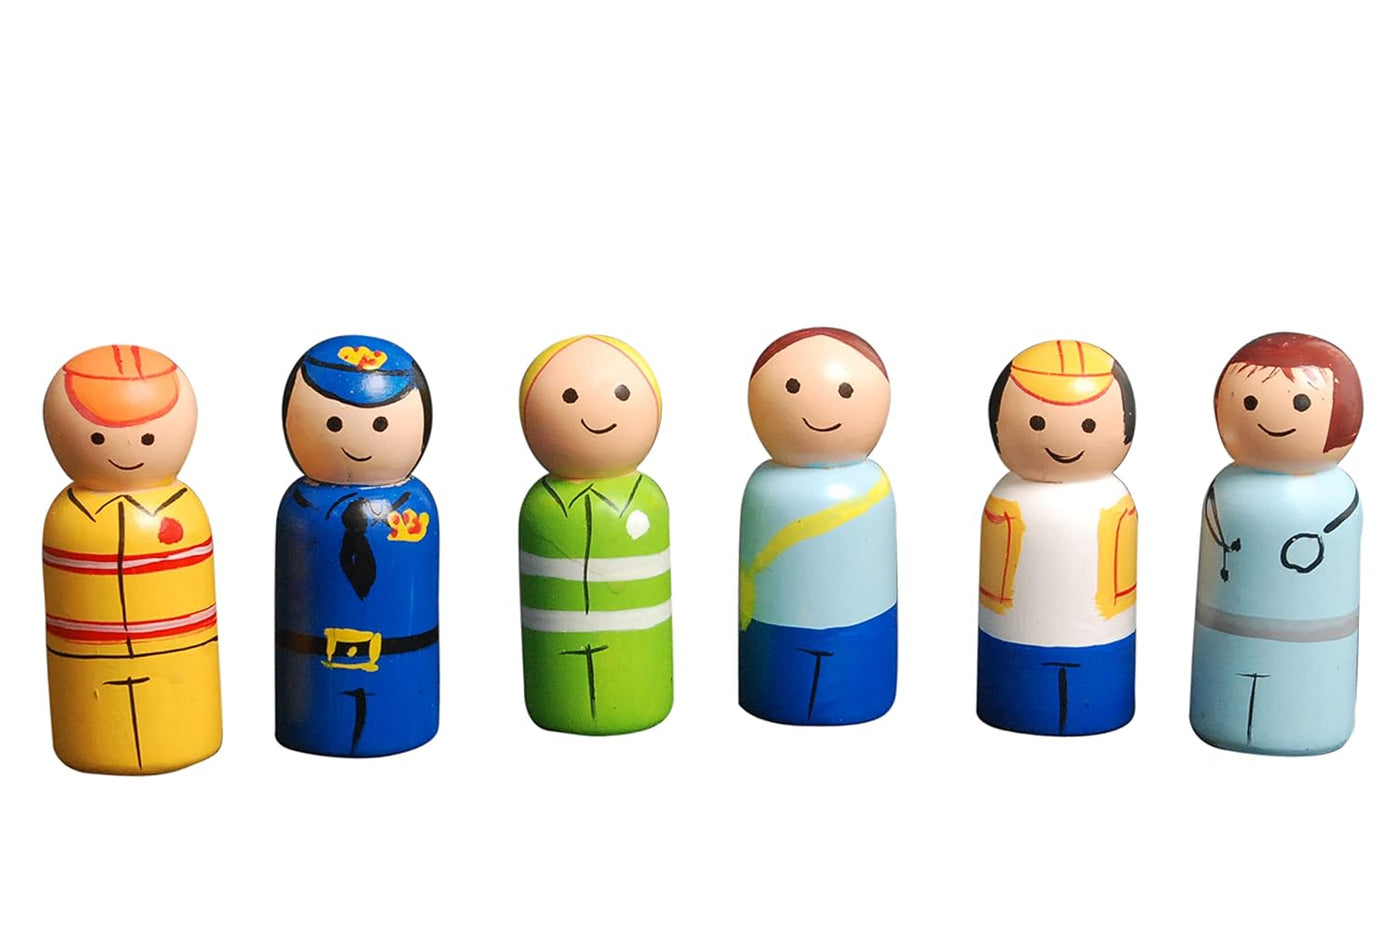 Peg Dolls Wooden Essential Workers/Community Helpers Pretend Play Figurines - Colorful Dolls for Kids & Toddlers (2 Years+) - Pack of 6 pcs - Open Ended Toys